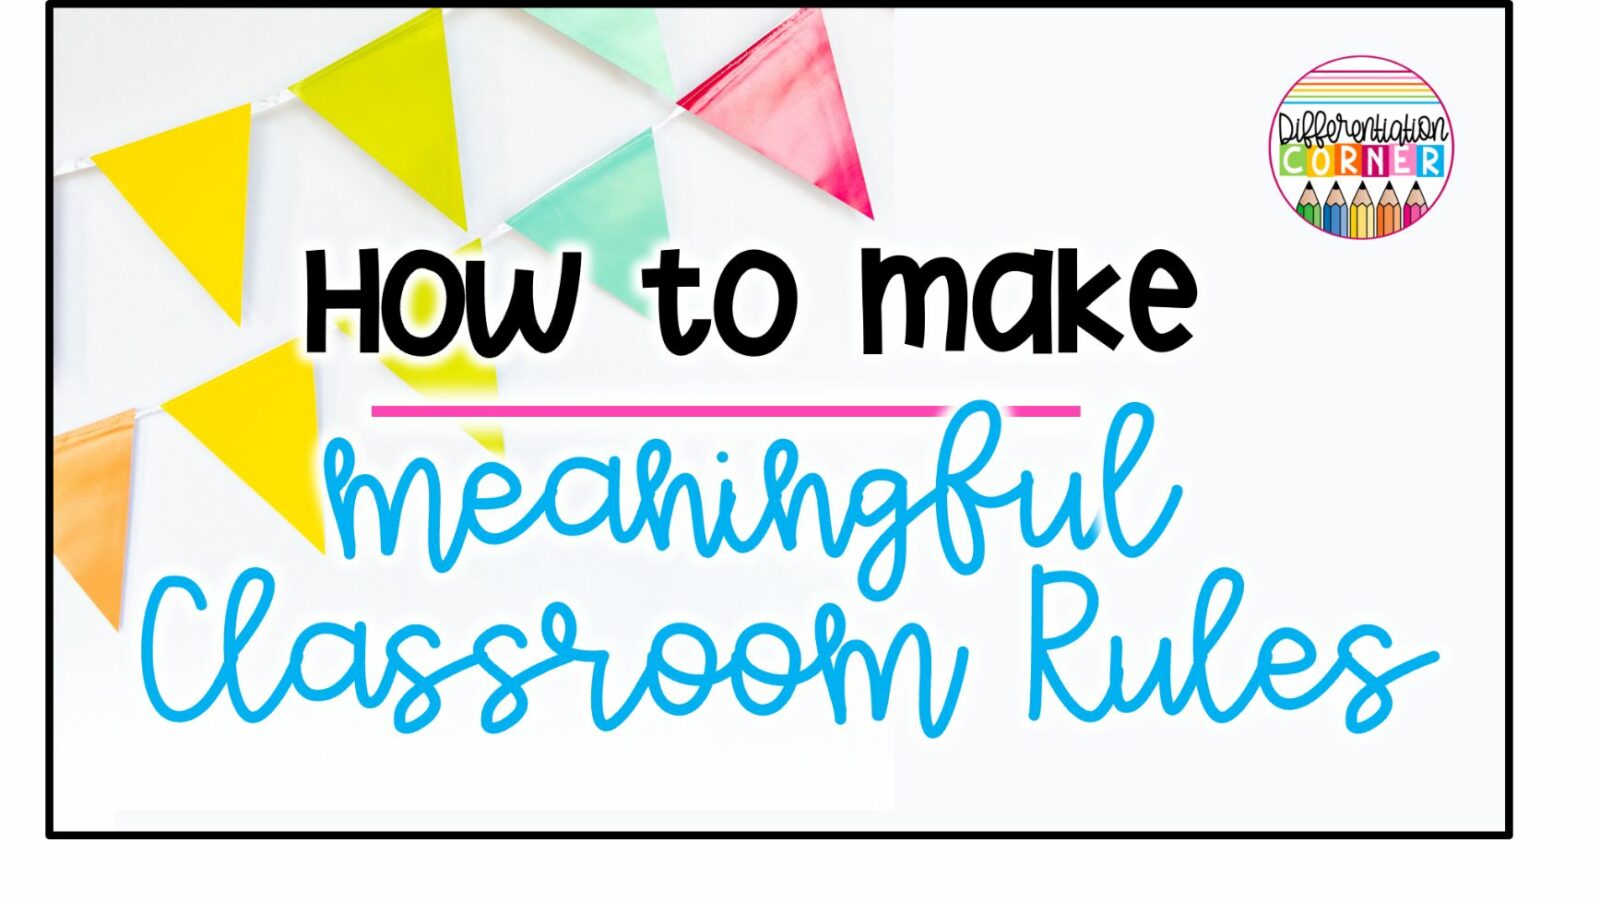 good classroom rules for elementary examples classroom rules for kids classroom rules posters